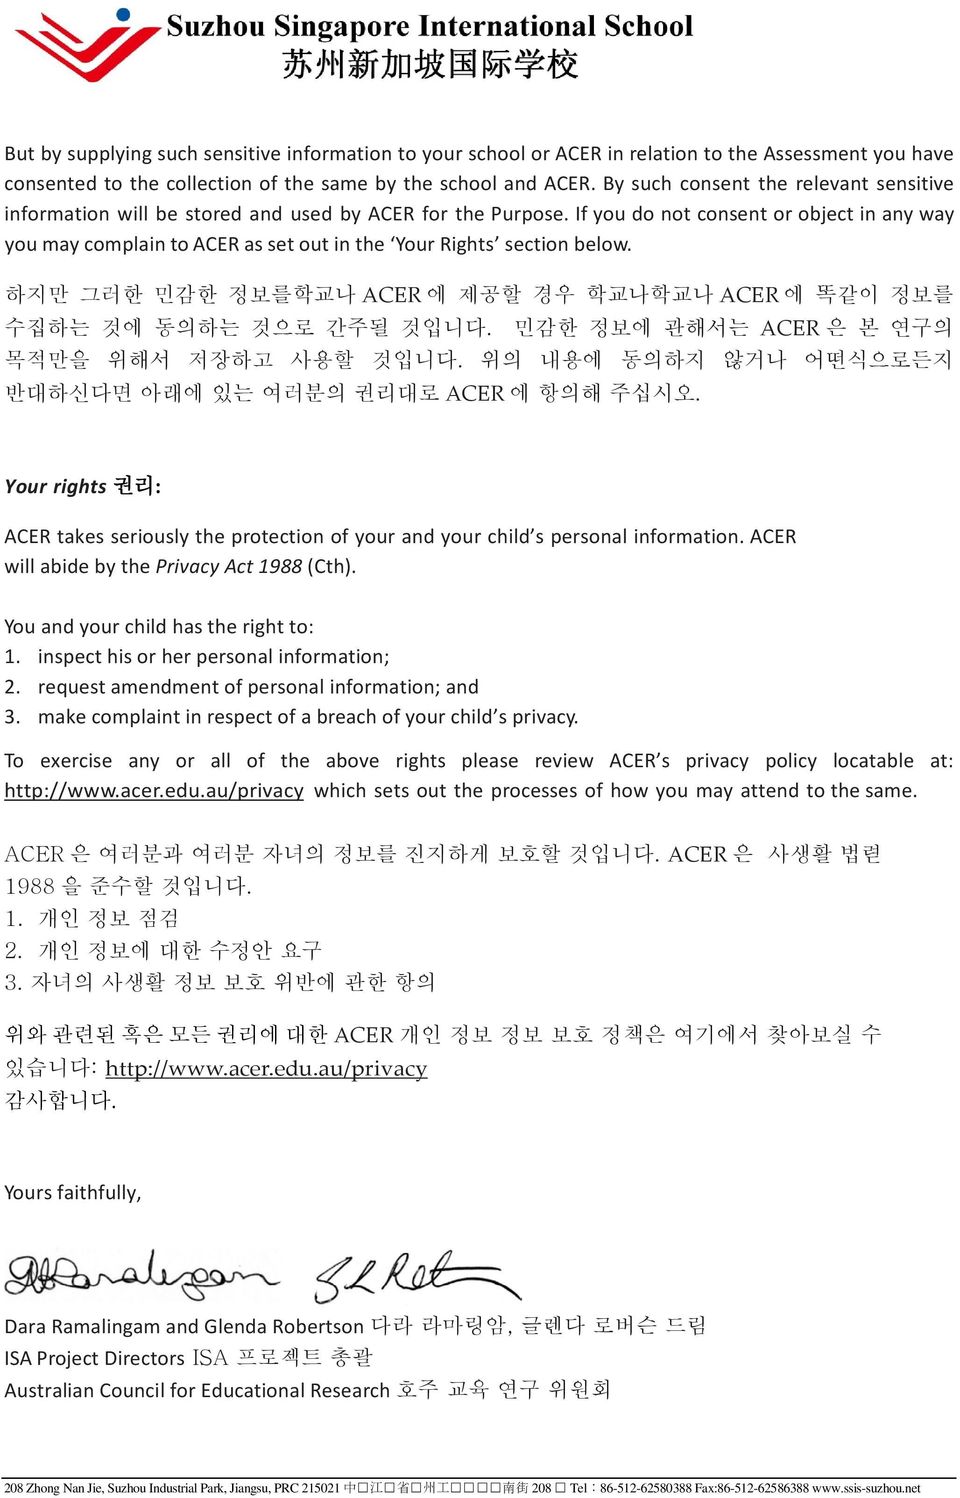 If you do not consent or object in any way you may complain to ACER as set out in the Your Rights section below. 하지만그러한민감한정보를학교나 ACER 에제공할경우학교나학교나 ACER 에똑같이정보를수집하는것에동의하는것으로간주될것입니다.